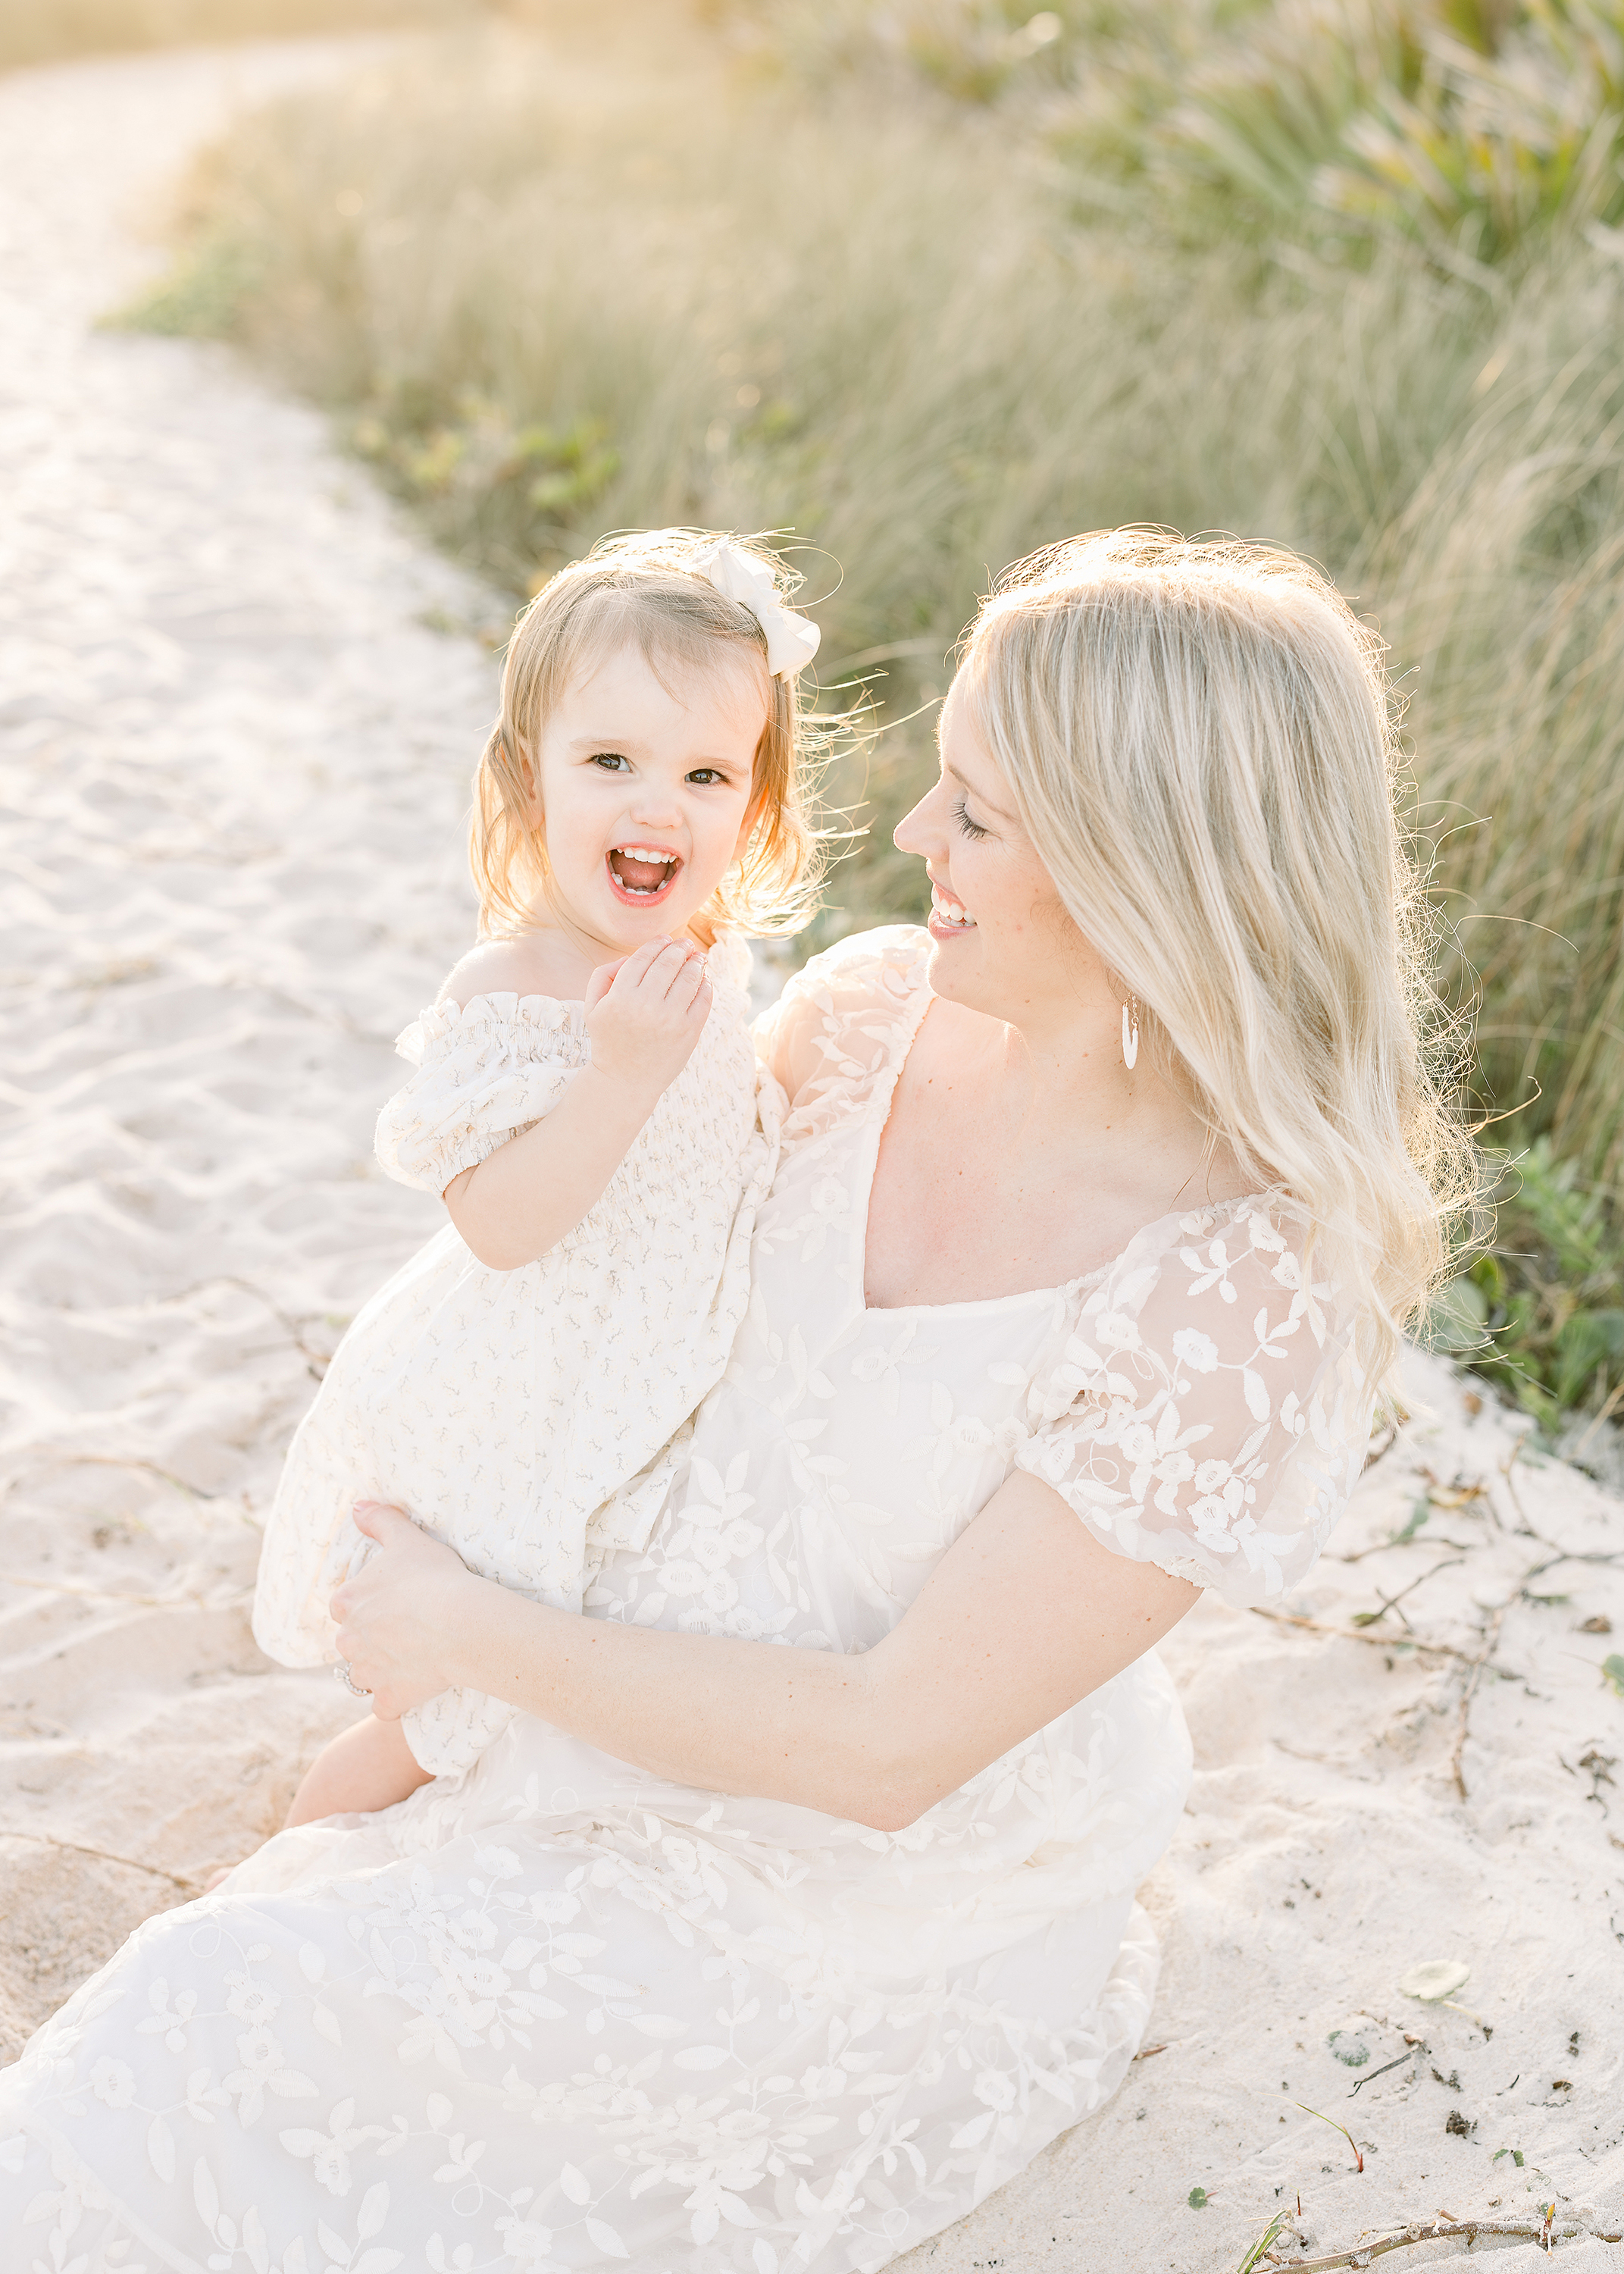 A light and airy sunset motherhood portrait of a pregnant woman and her toddler child.